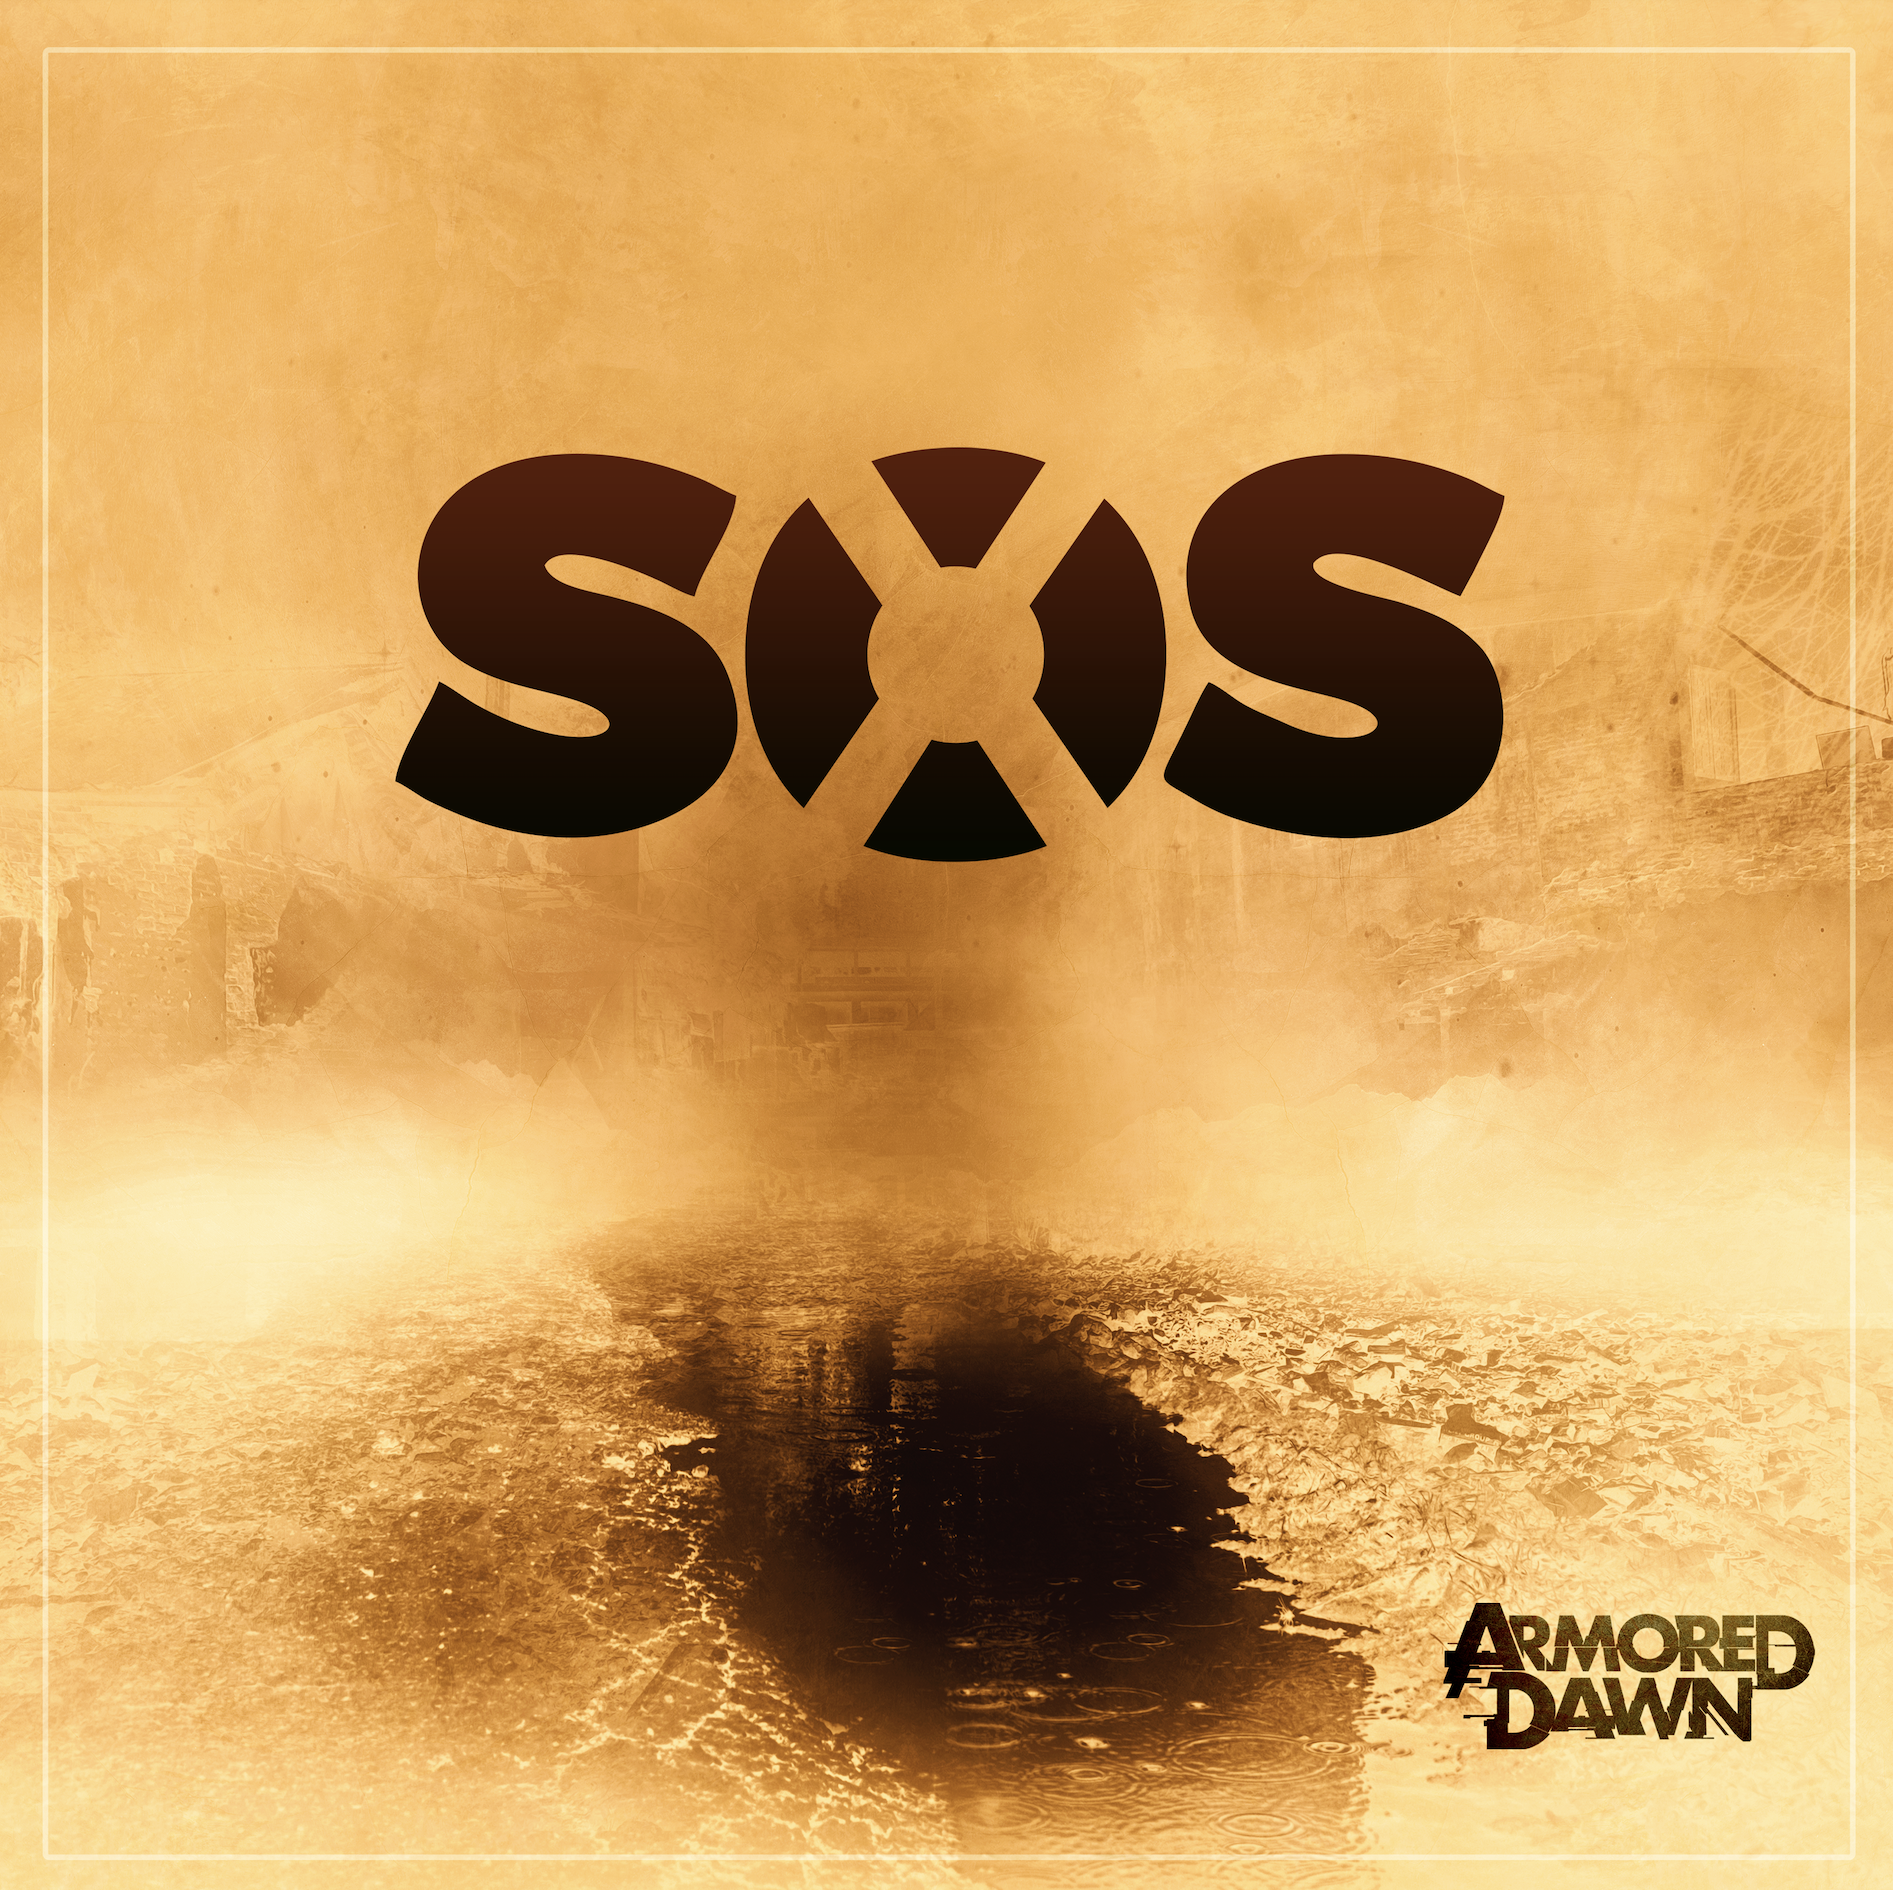 ‘S.O.S’ from ‘Armored Dawn’ with it’s infectious, rocking, powerful and epic alternative rock sound is on the playlist now.